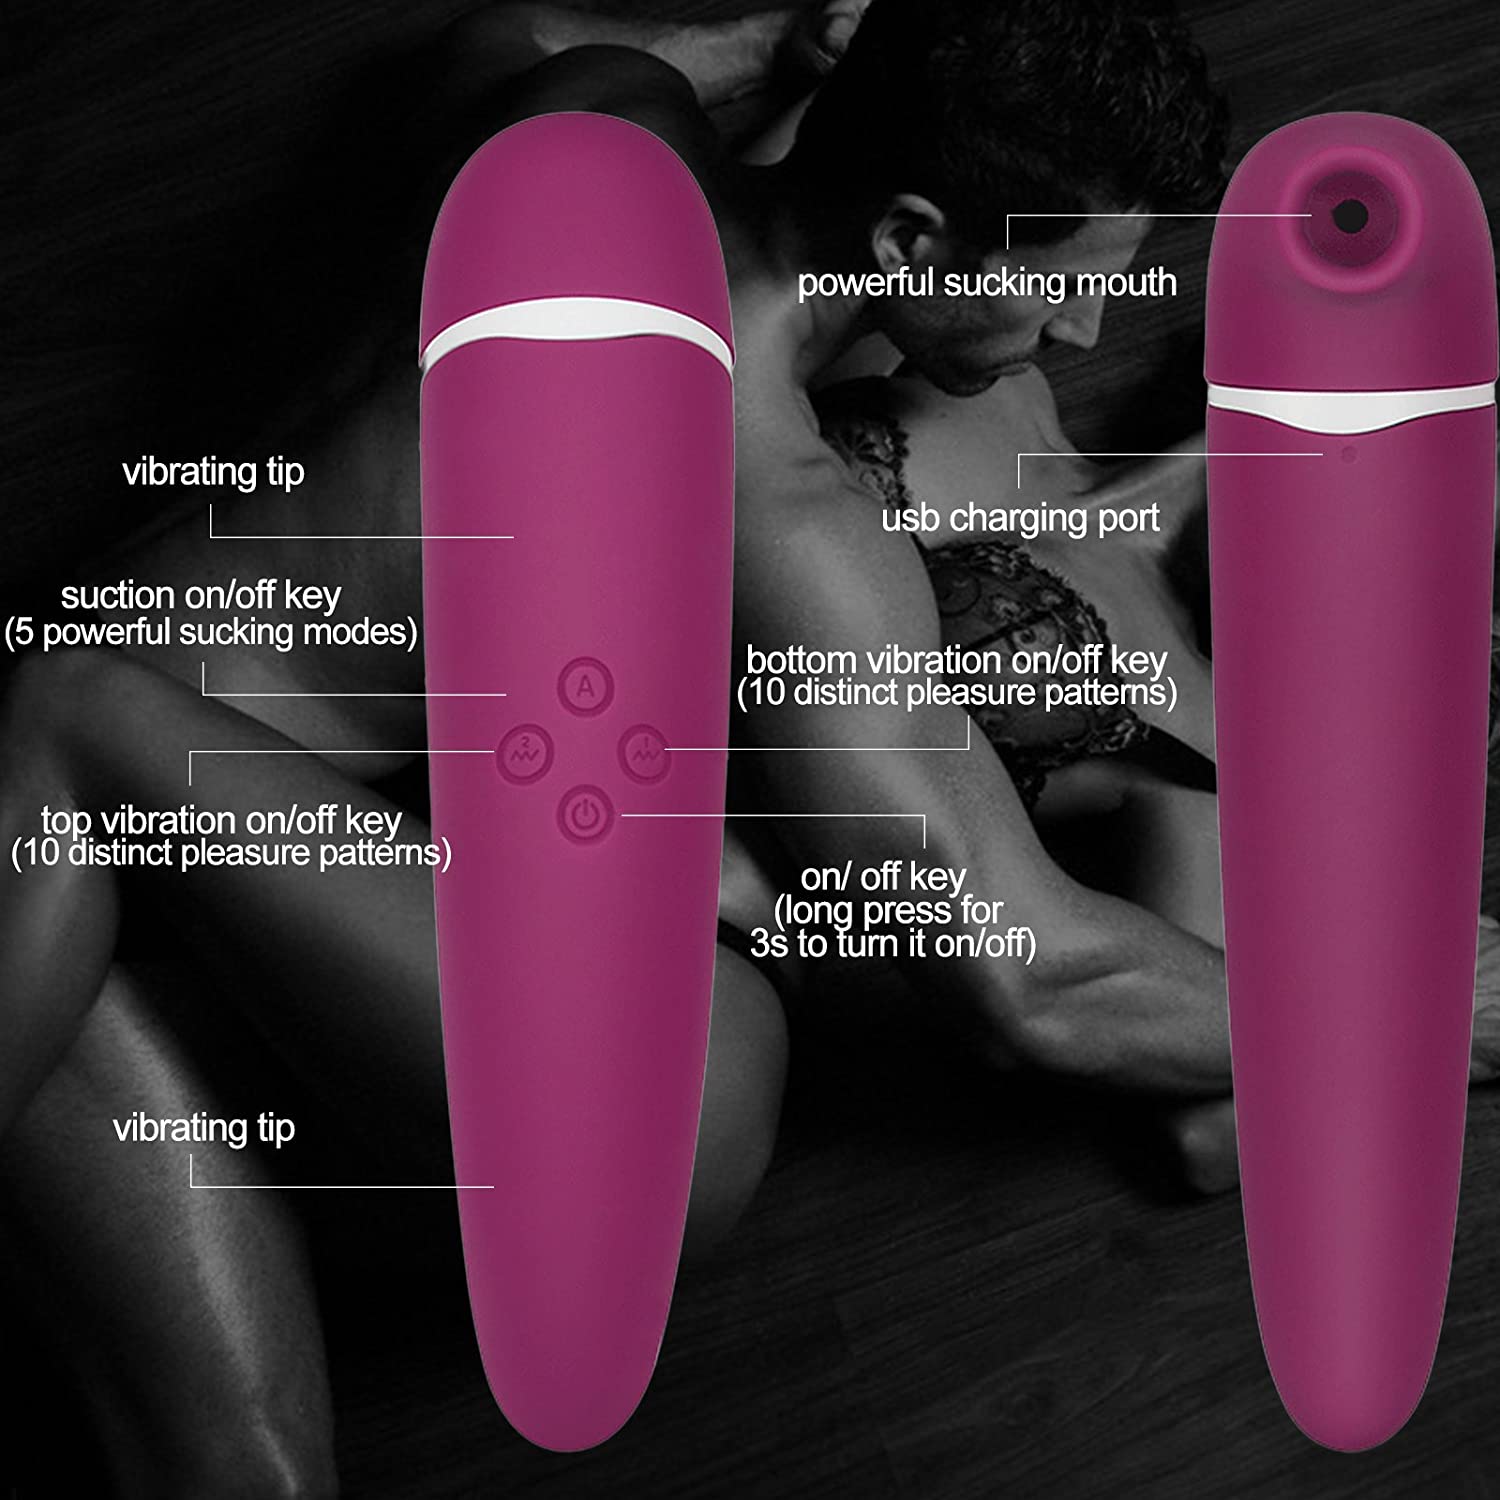 best of Vibrator Couples sucing